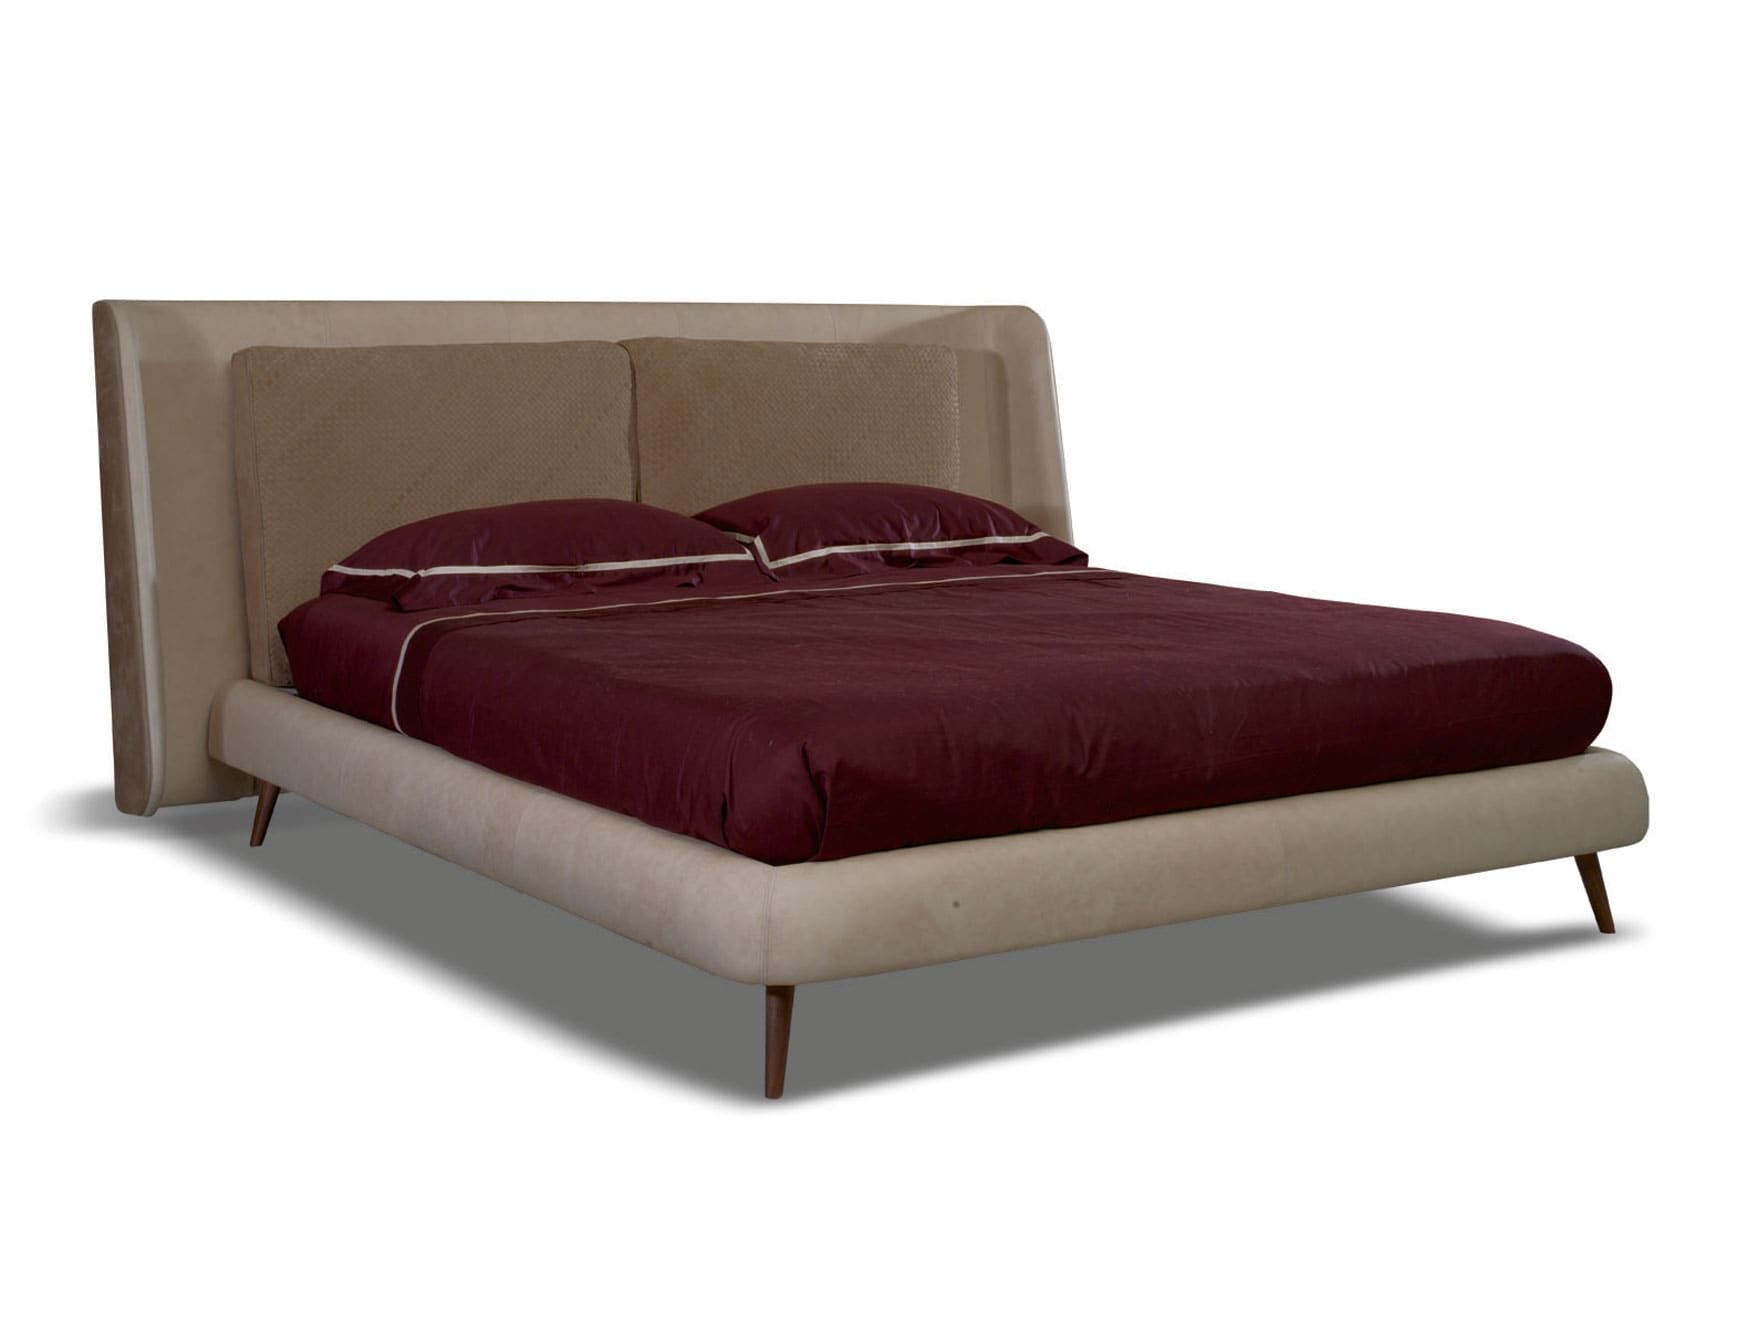 Angelina modern Italian bed with beige leather